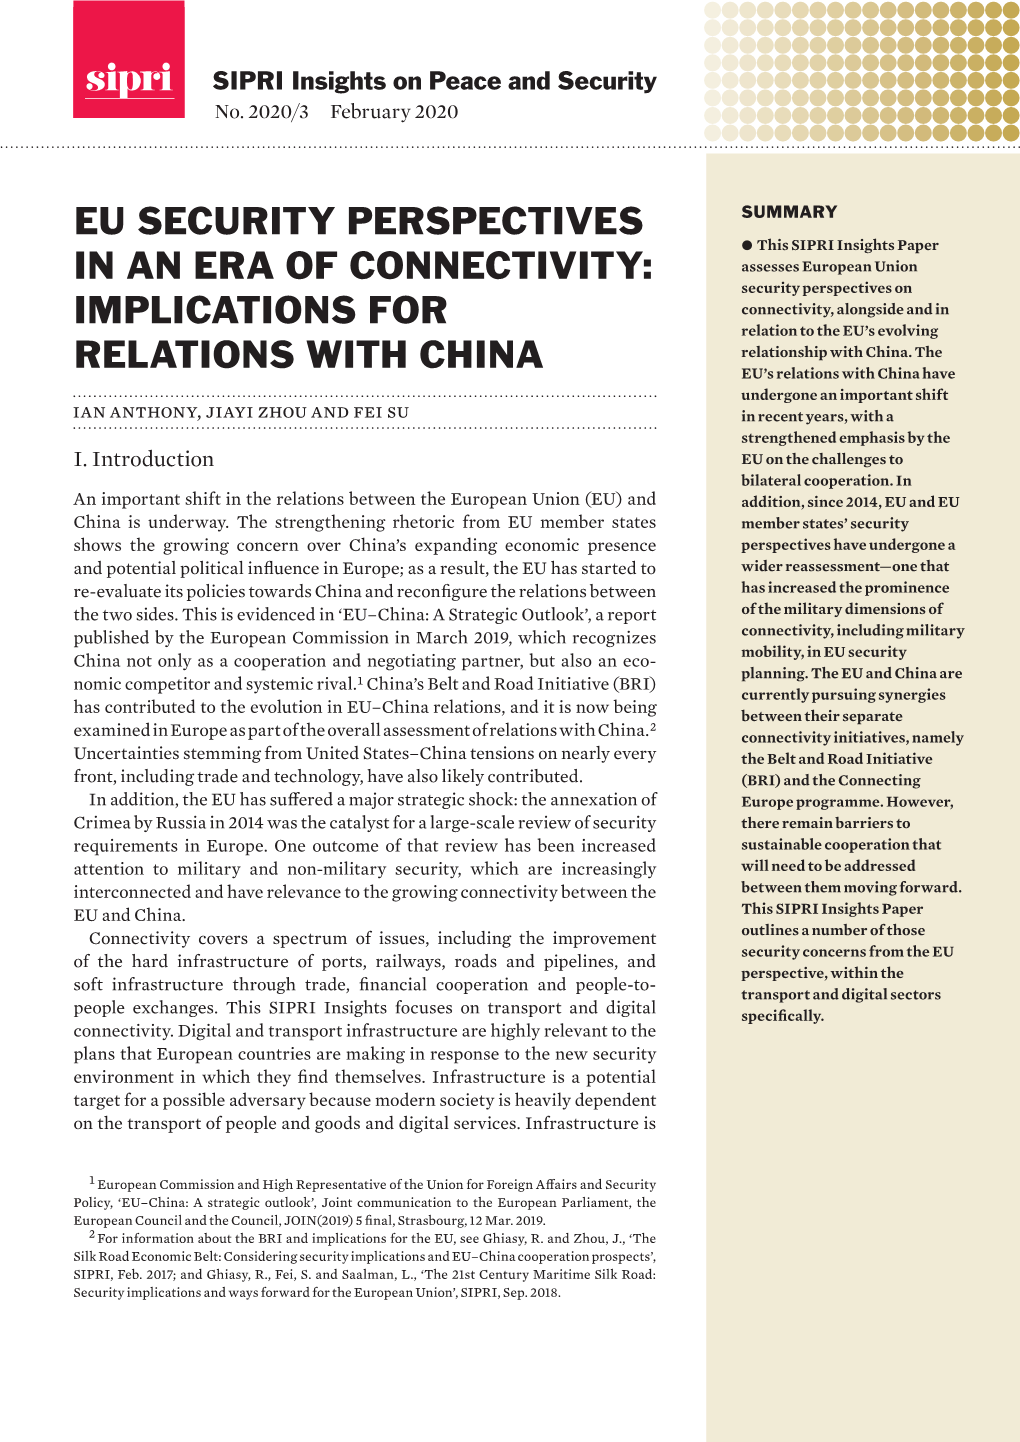 Implications for Relations with China